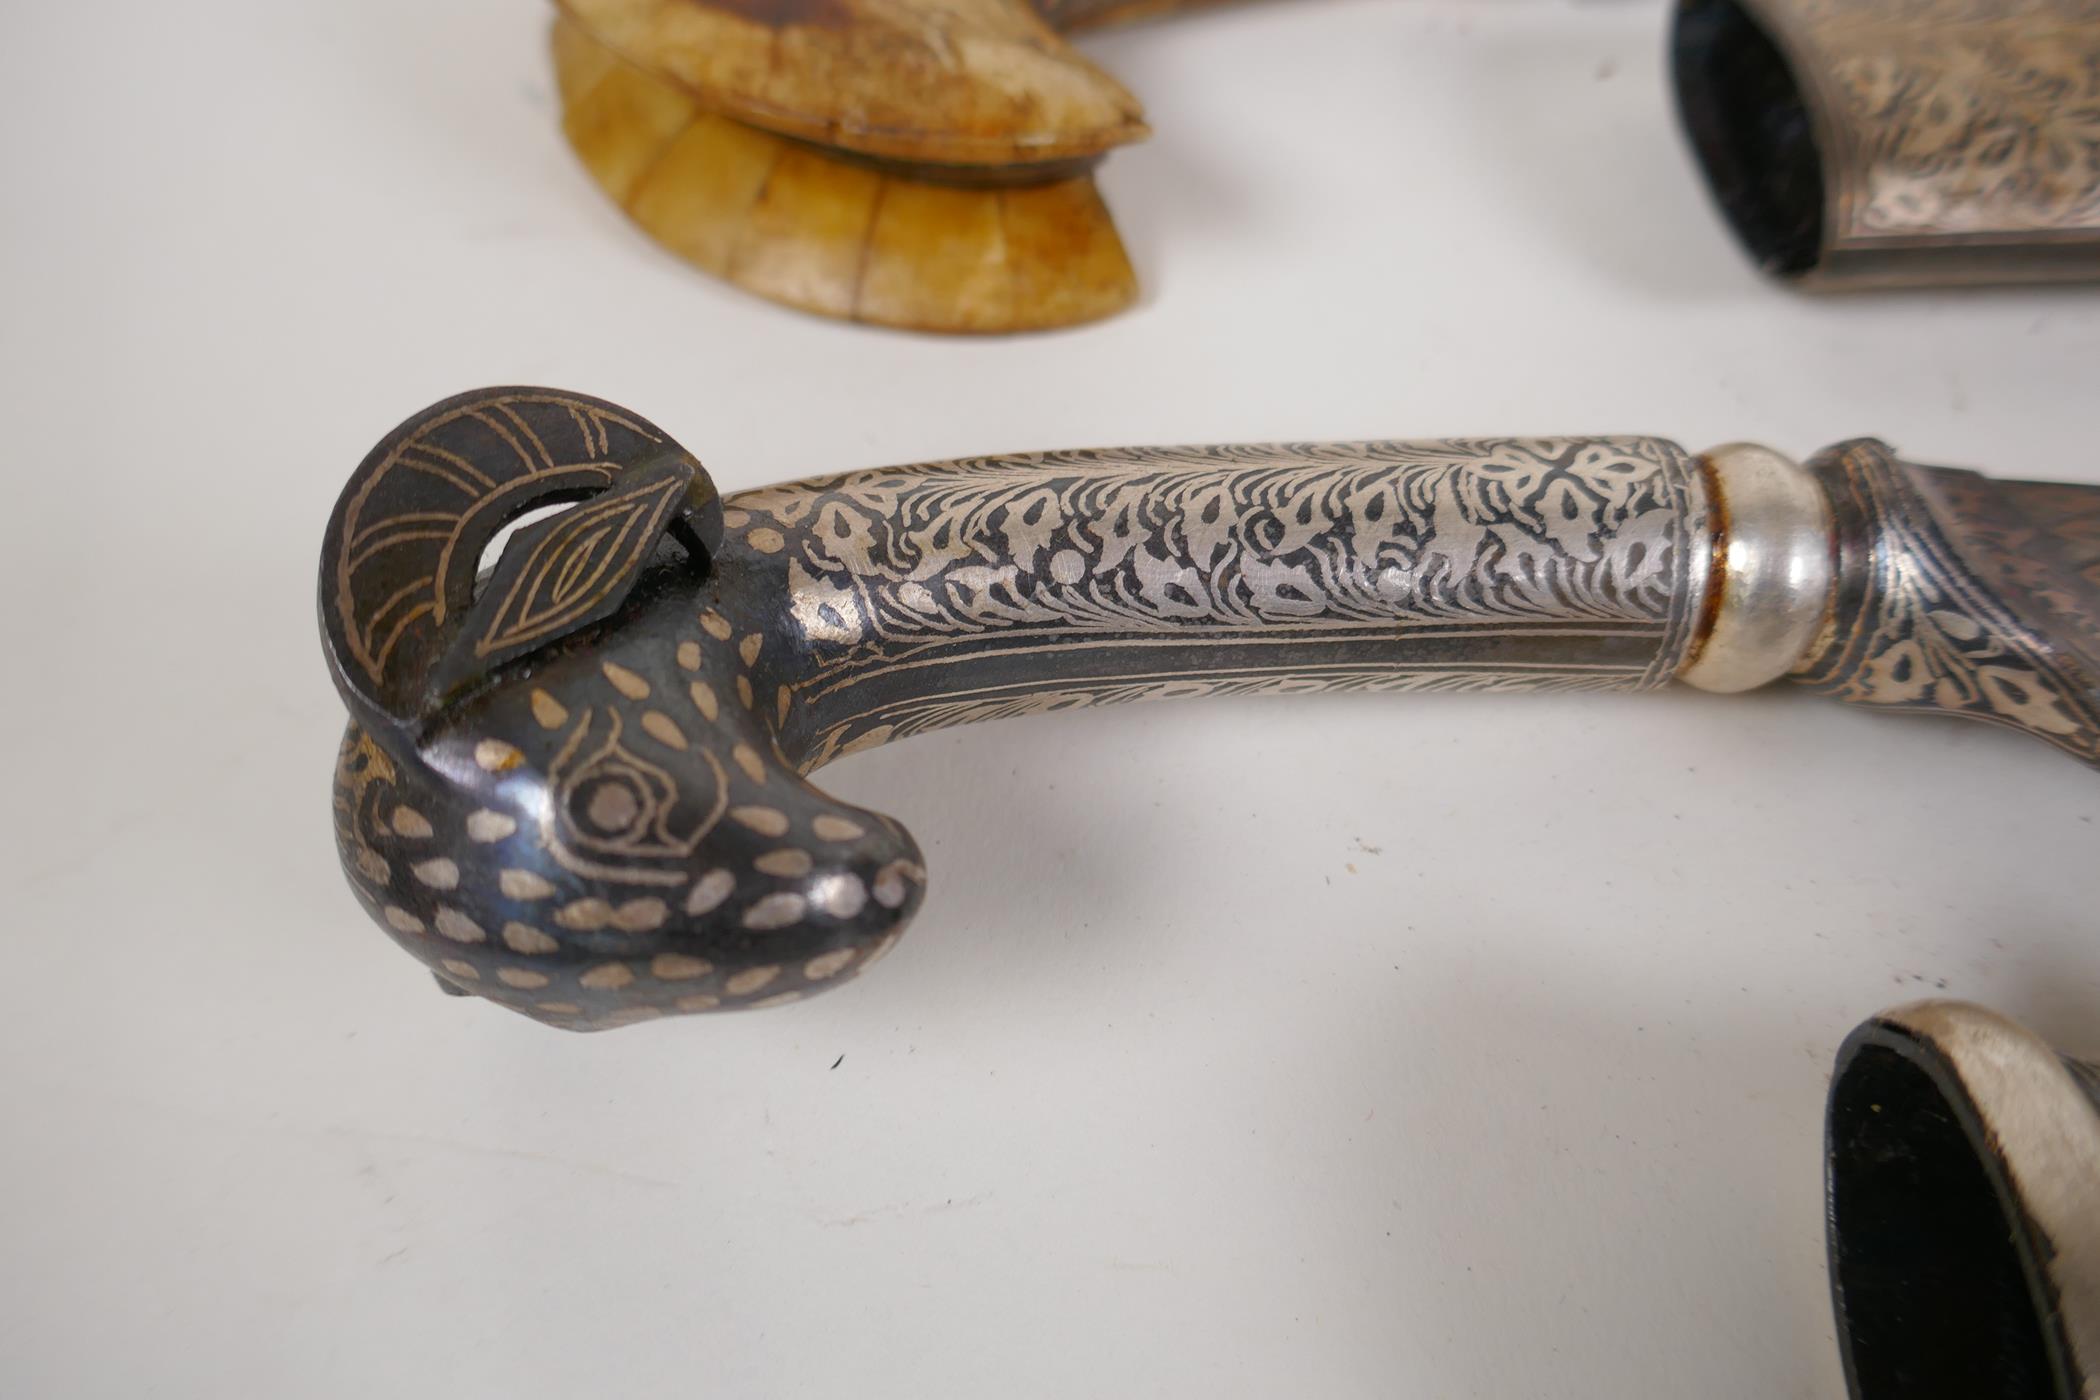 An Eastern dagger with rams mask handle and niello decorated scabbard, 15" long, and a horn - Image 3 of 5